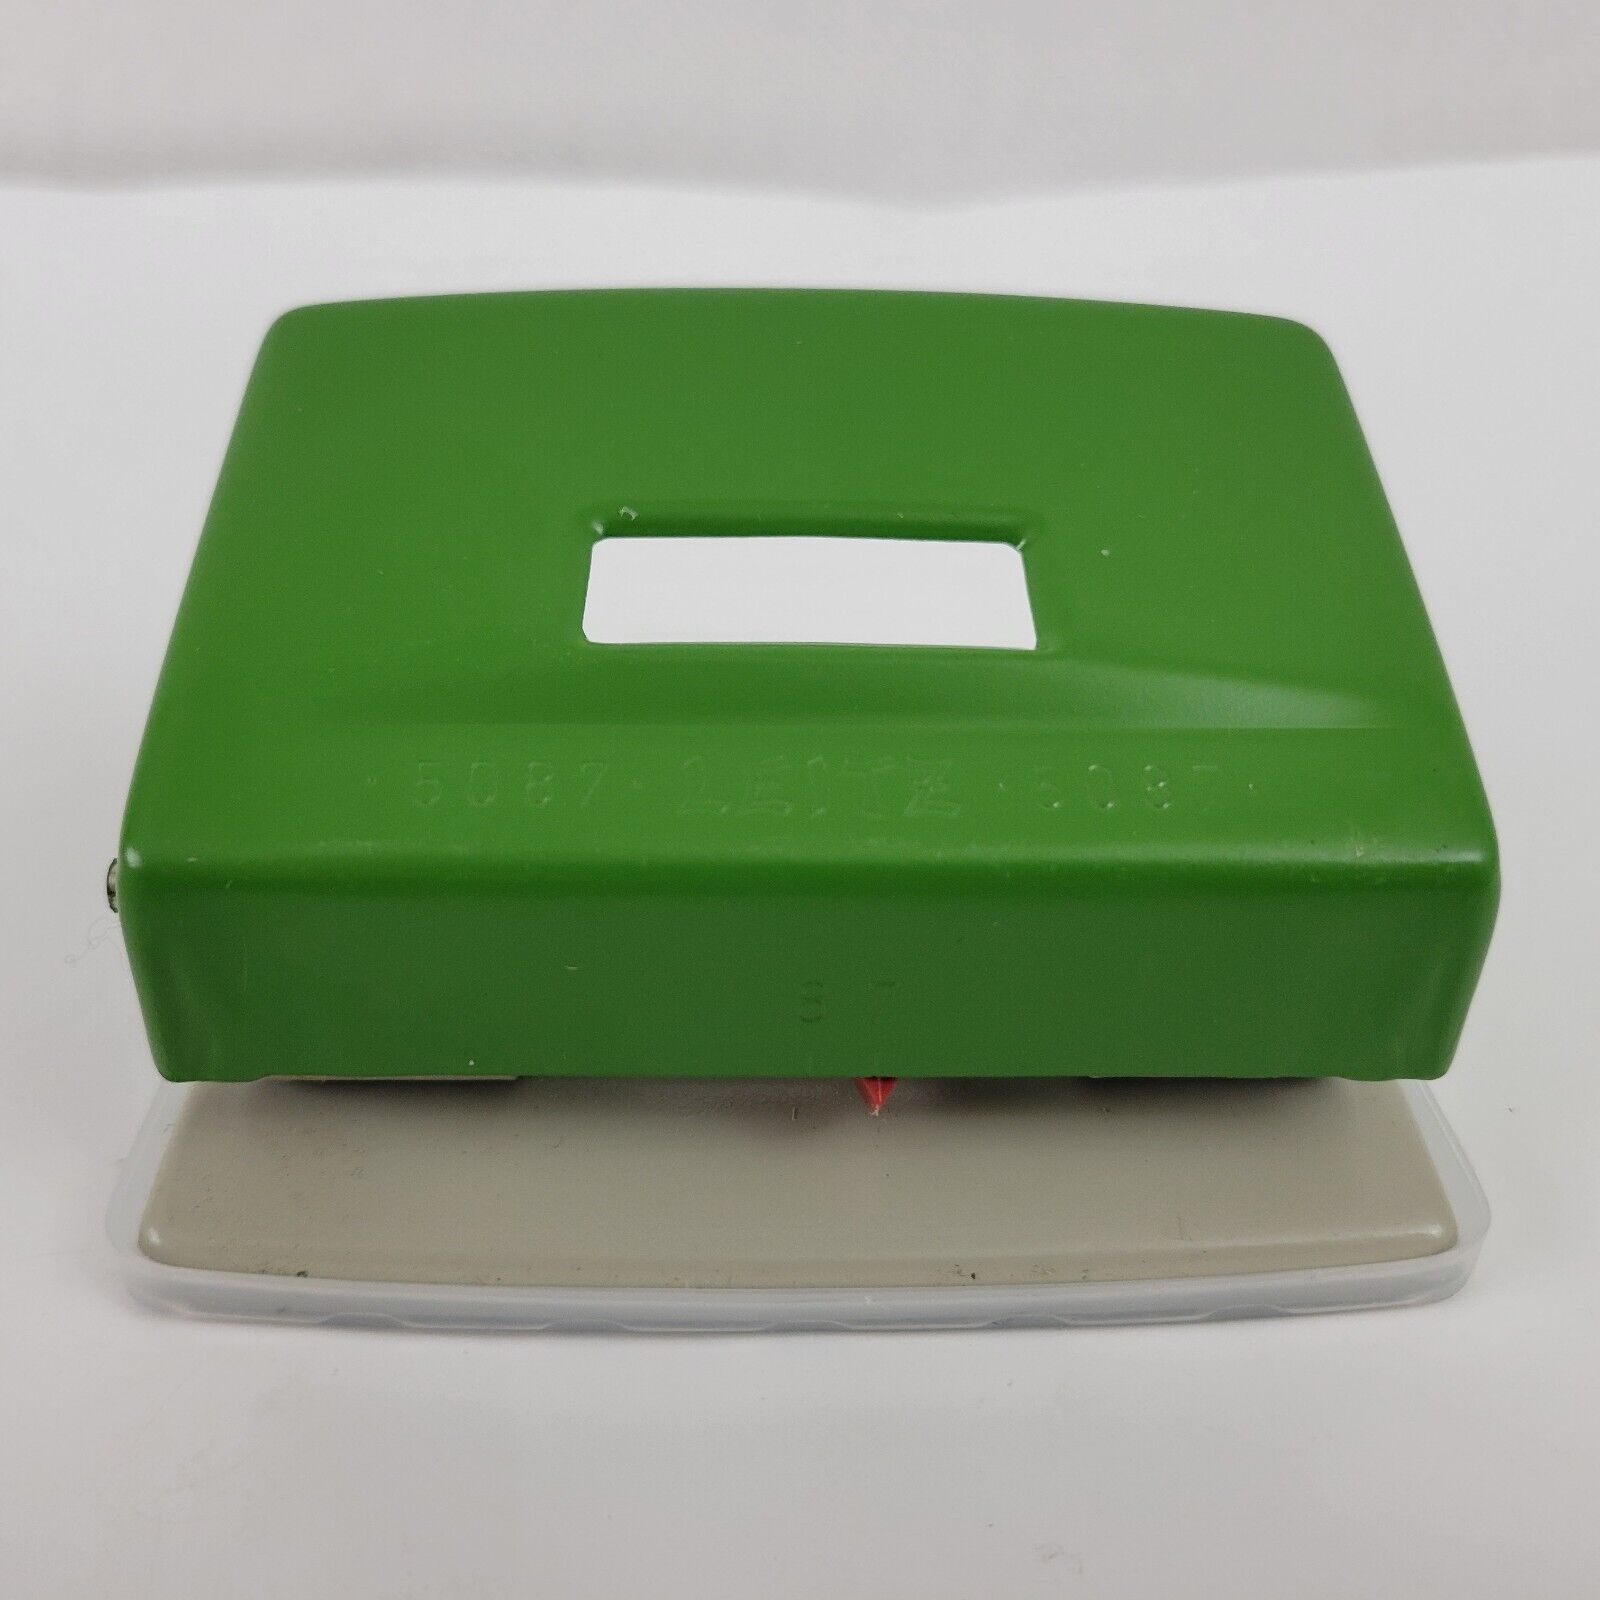 Leitz 5087 2 Hole Punch, Two width settings (7 cm / 8 cm) Green, Germany, 1960s